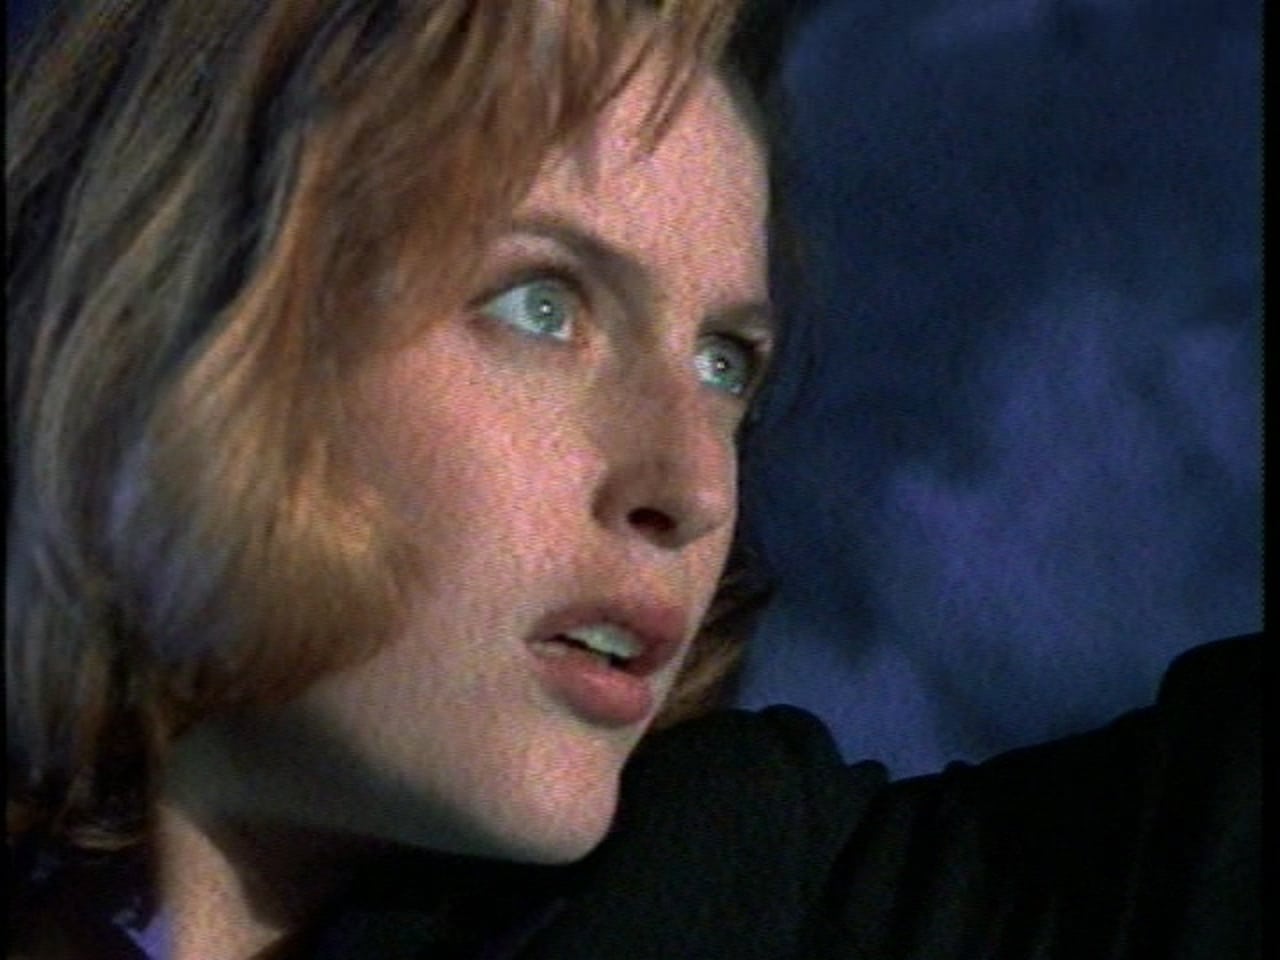 The X-Files - Season 0 Episode 28 : Behind the truth - Dana Scully